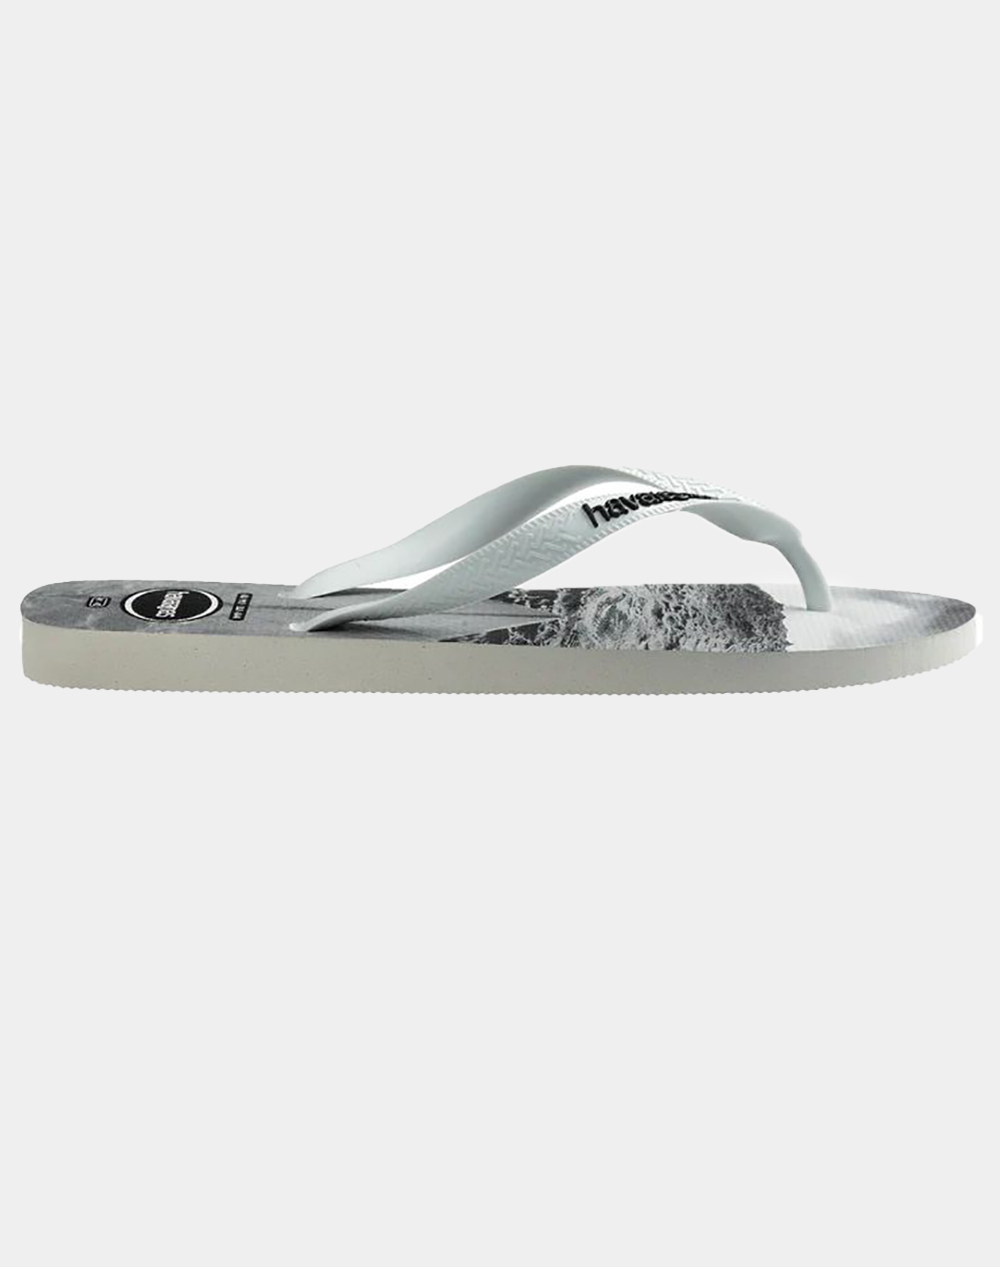 HAVAIANAS HYPE ΣΑΓΙΟΝΑΡΕΣ 4127920-6194 OffWhite